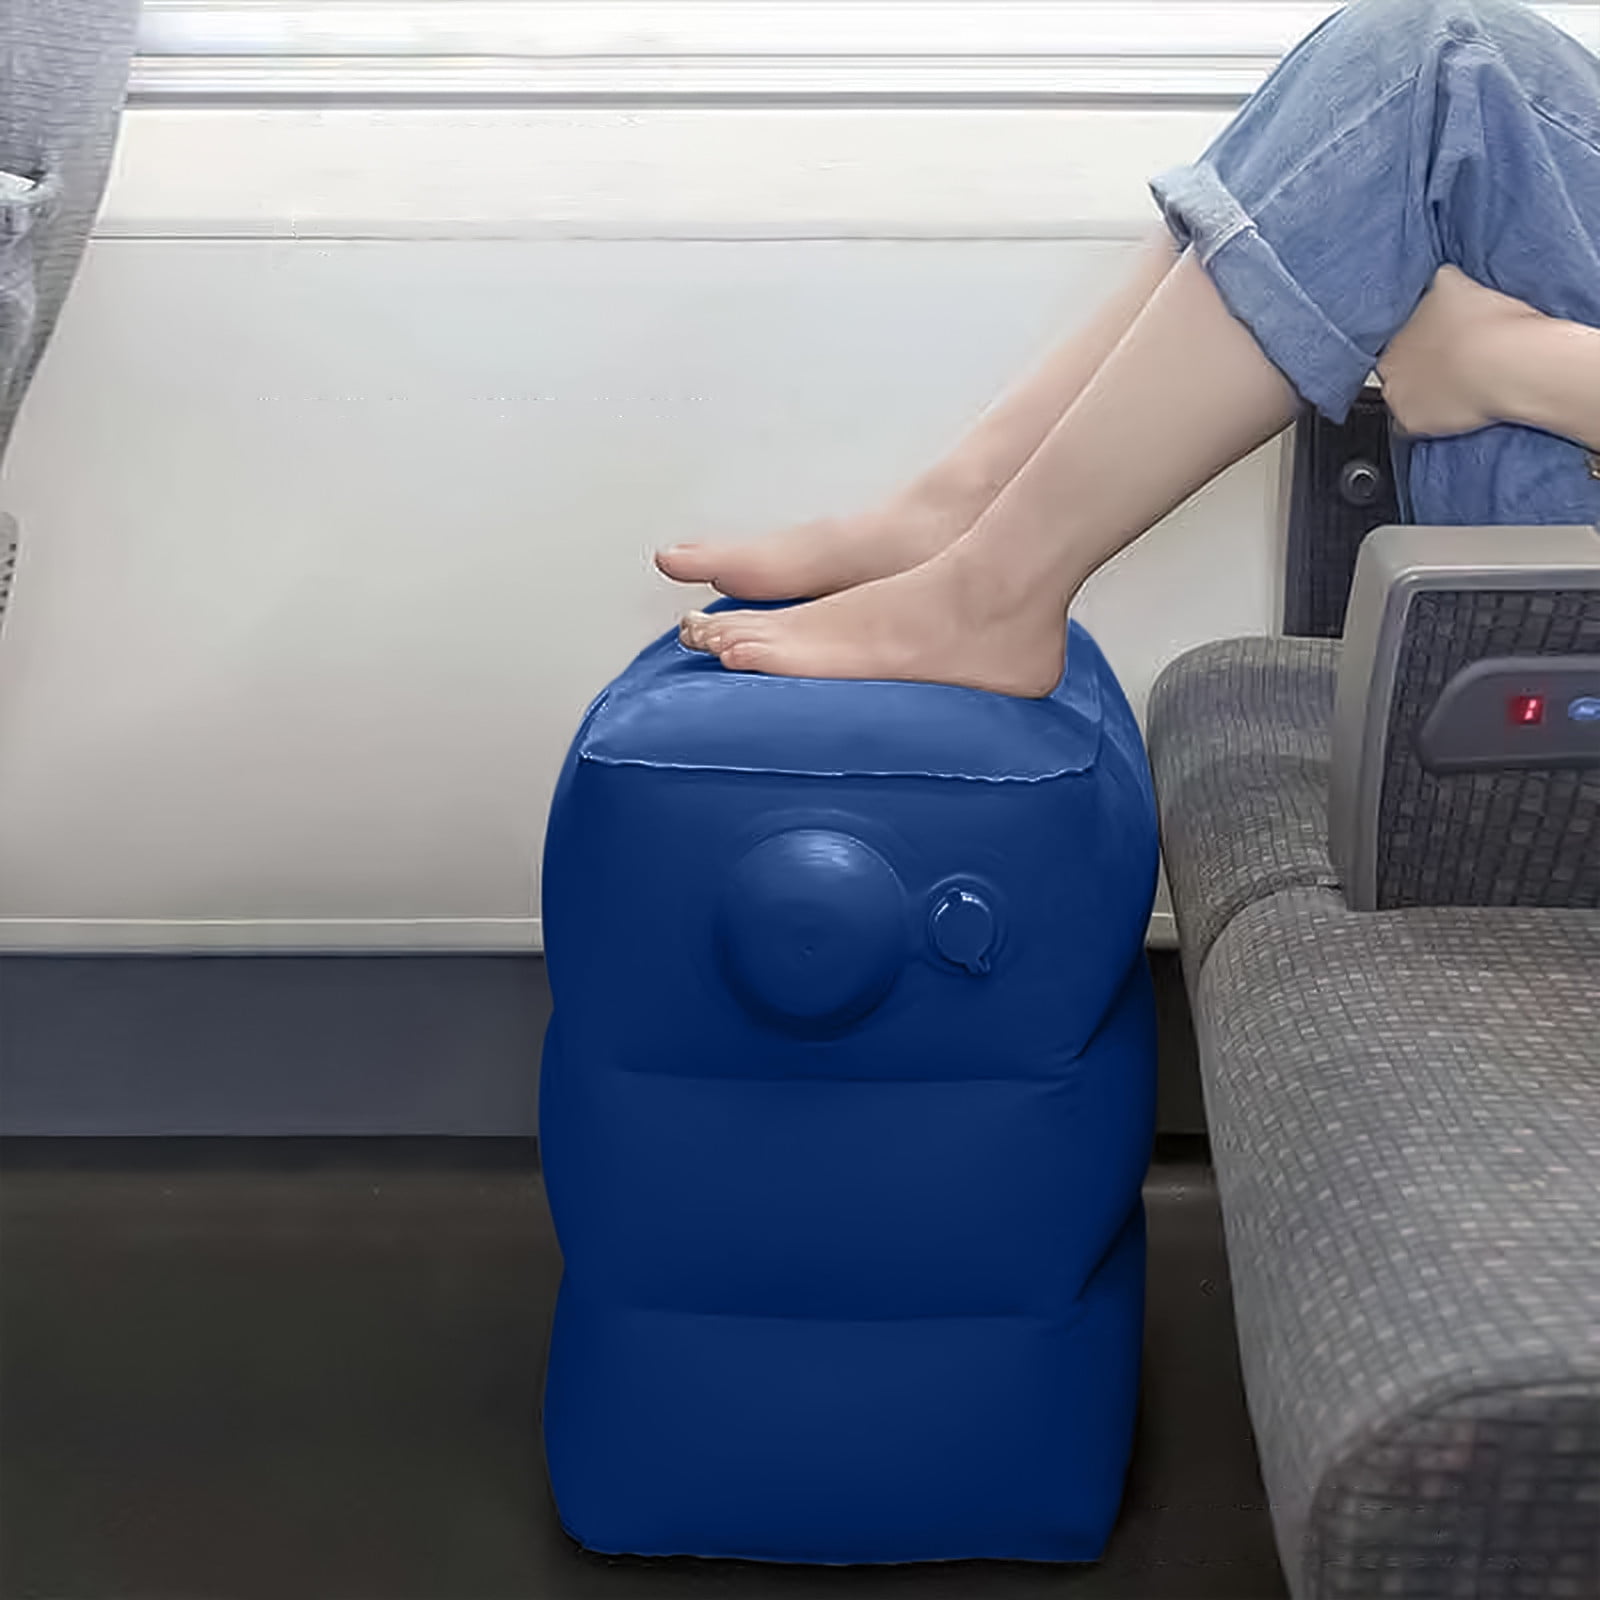 LWITHSZG Travel Foot Rest - Inflatable Foot Rest Pillow, Airplane